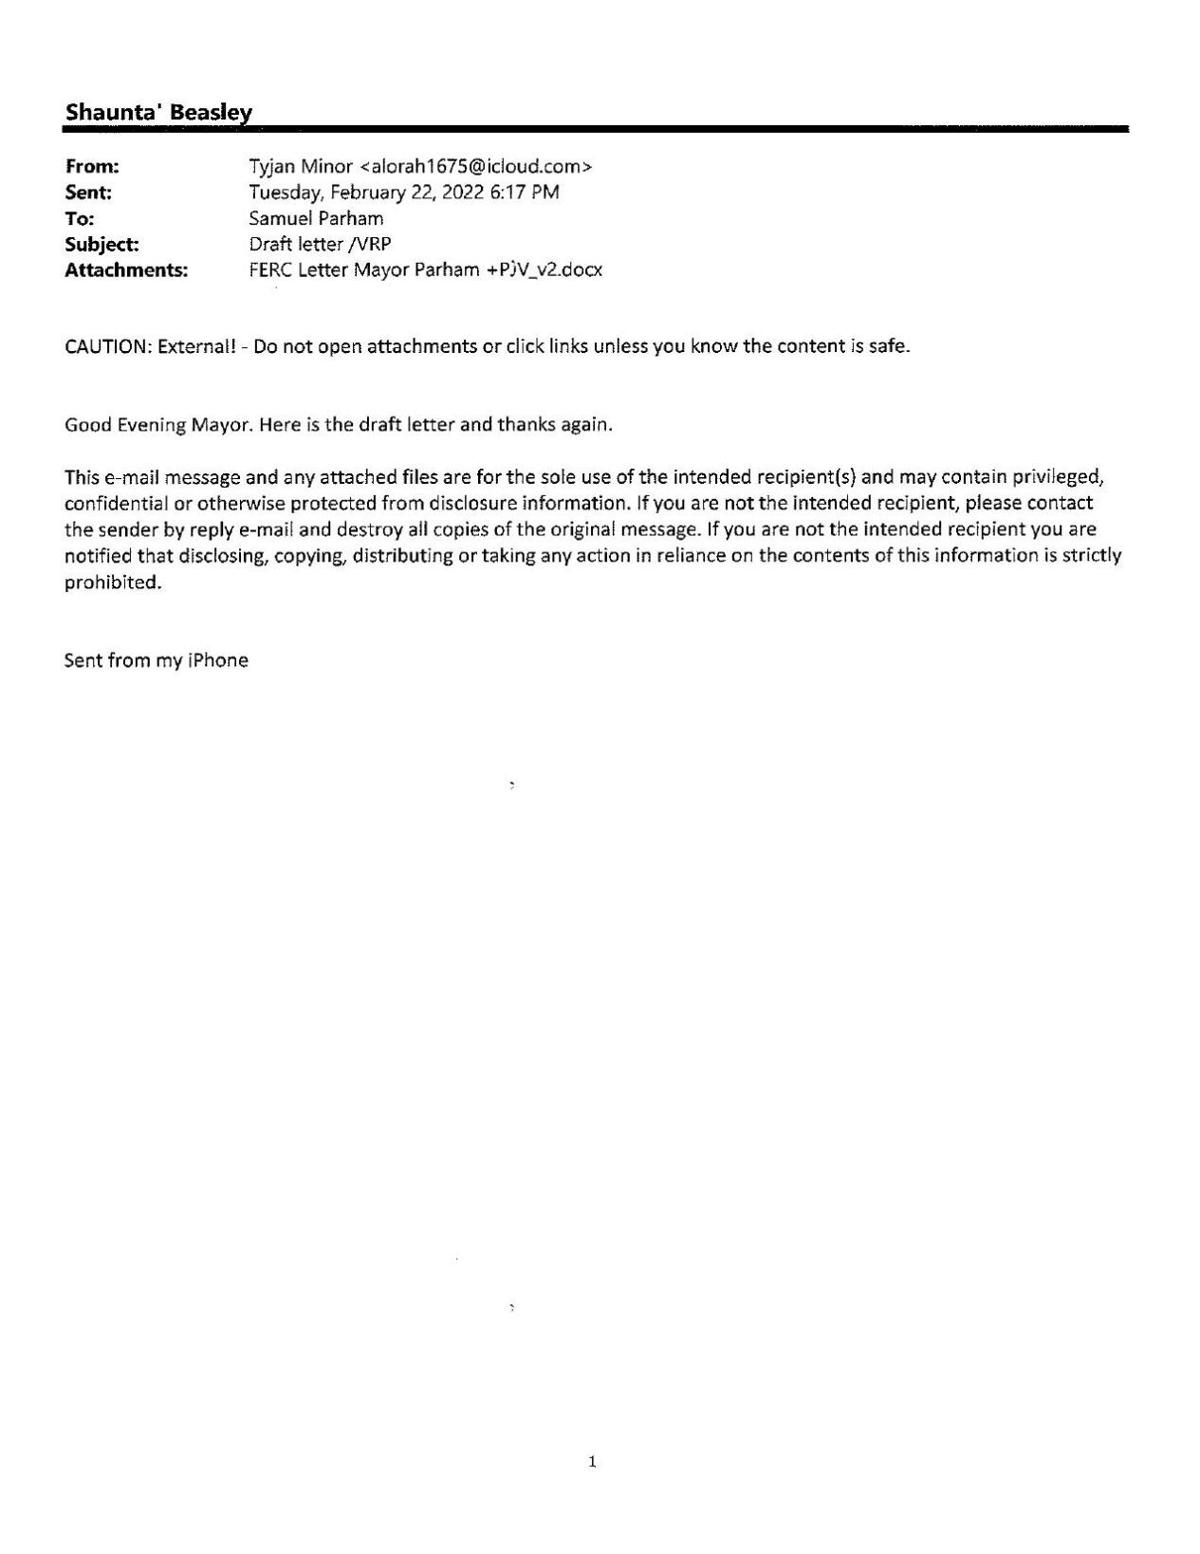 VMRC member's emails with Petersburg officials